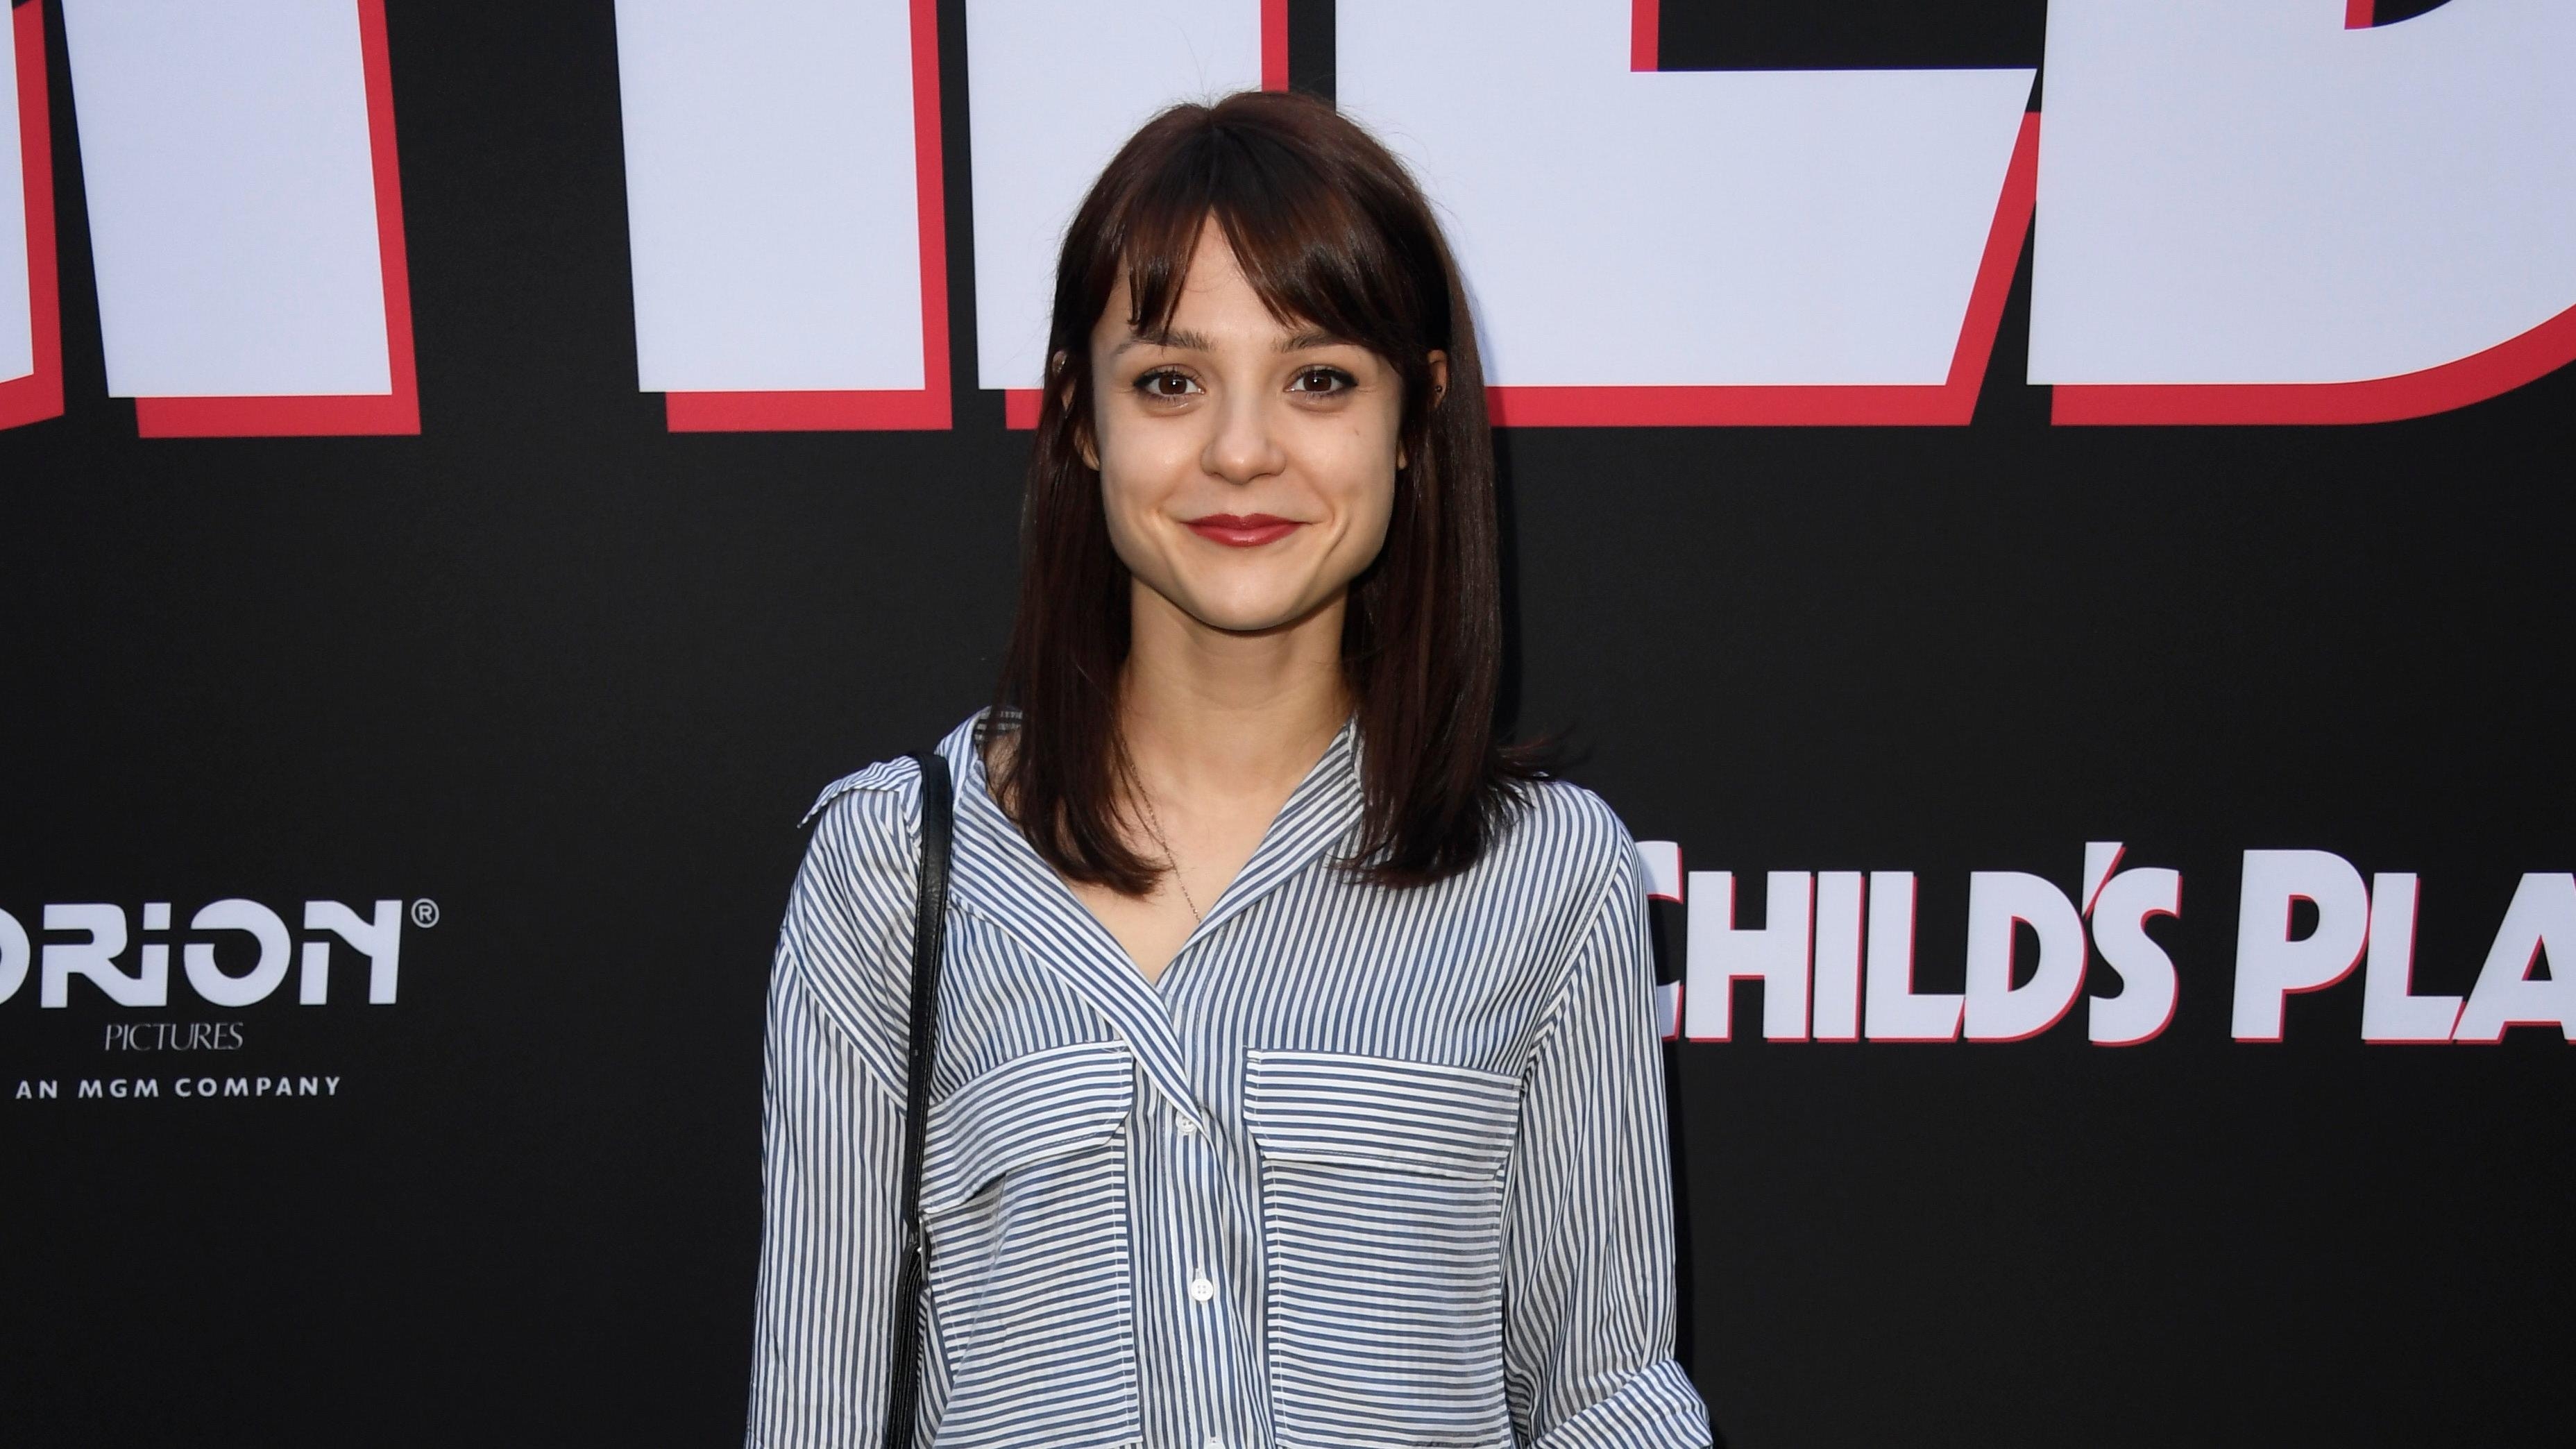 Skins star Kathryn Prescott is in the ICU after being hit by a cement truck